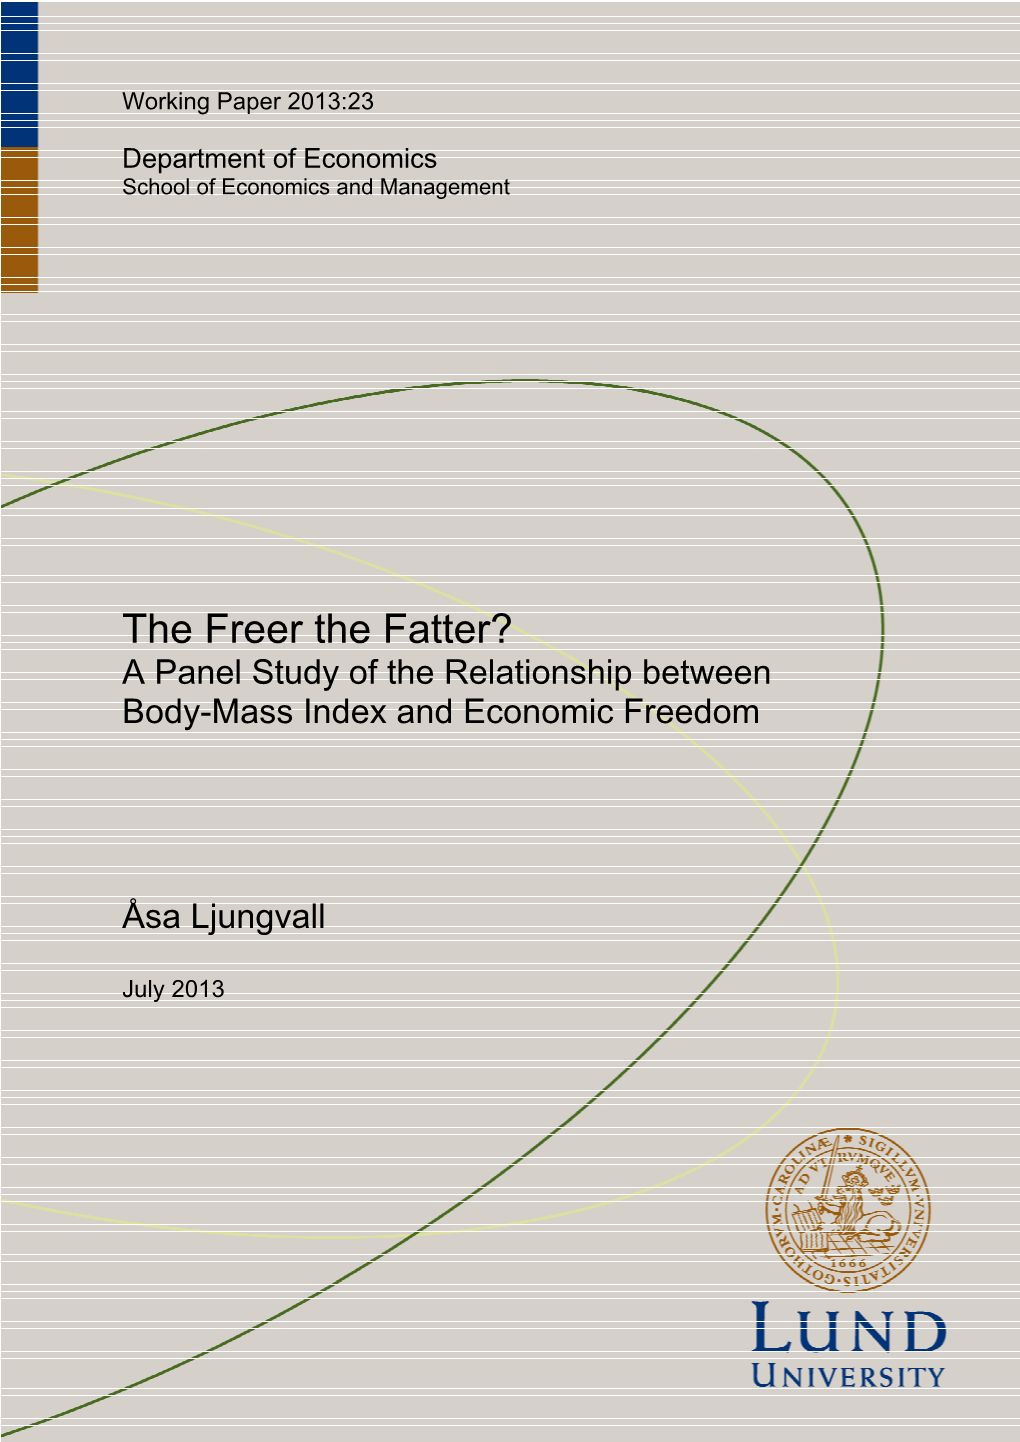 The Freer the Fatter? a Panel Study of the Relationship Between Body-Mass Index and Economic Freedom